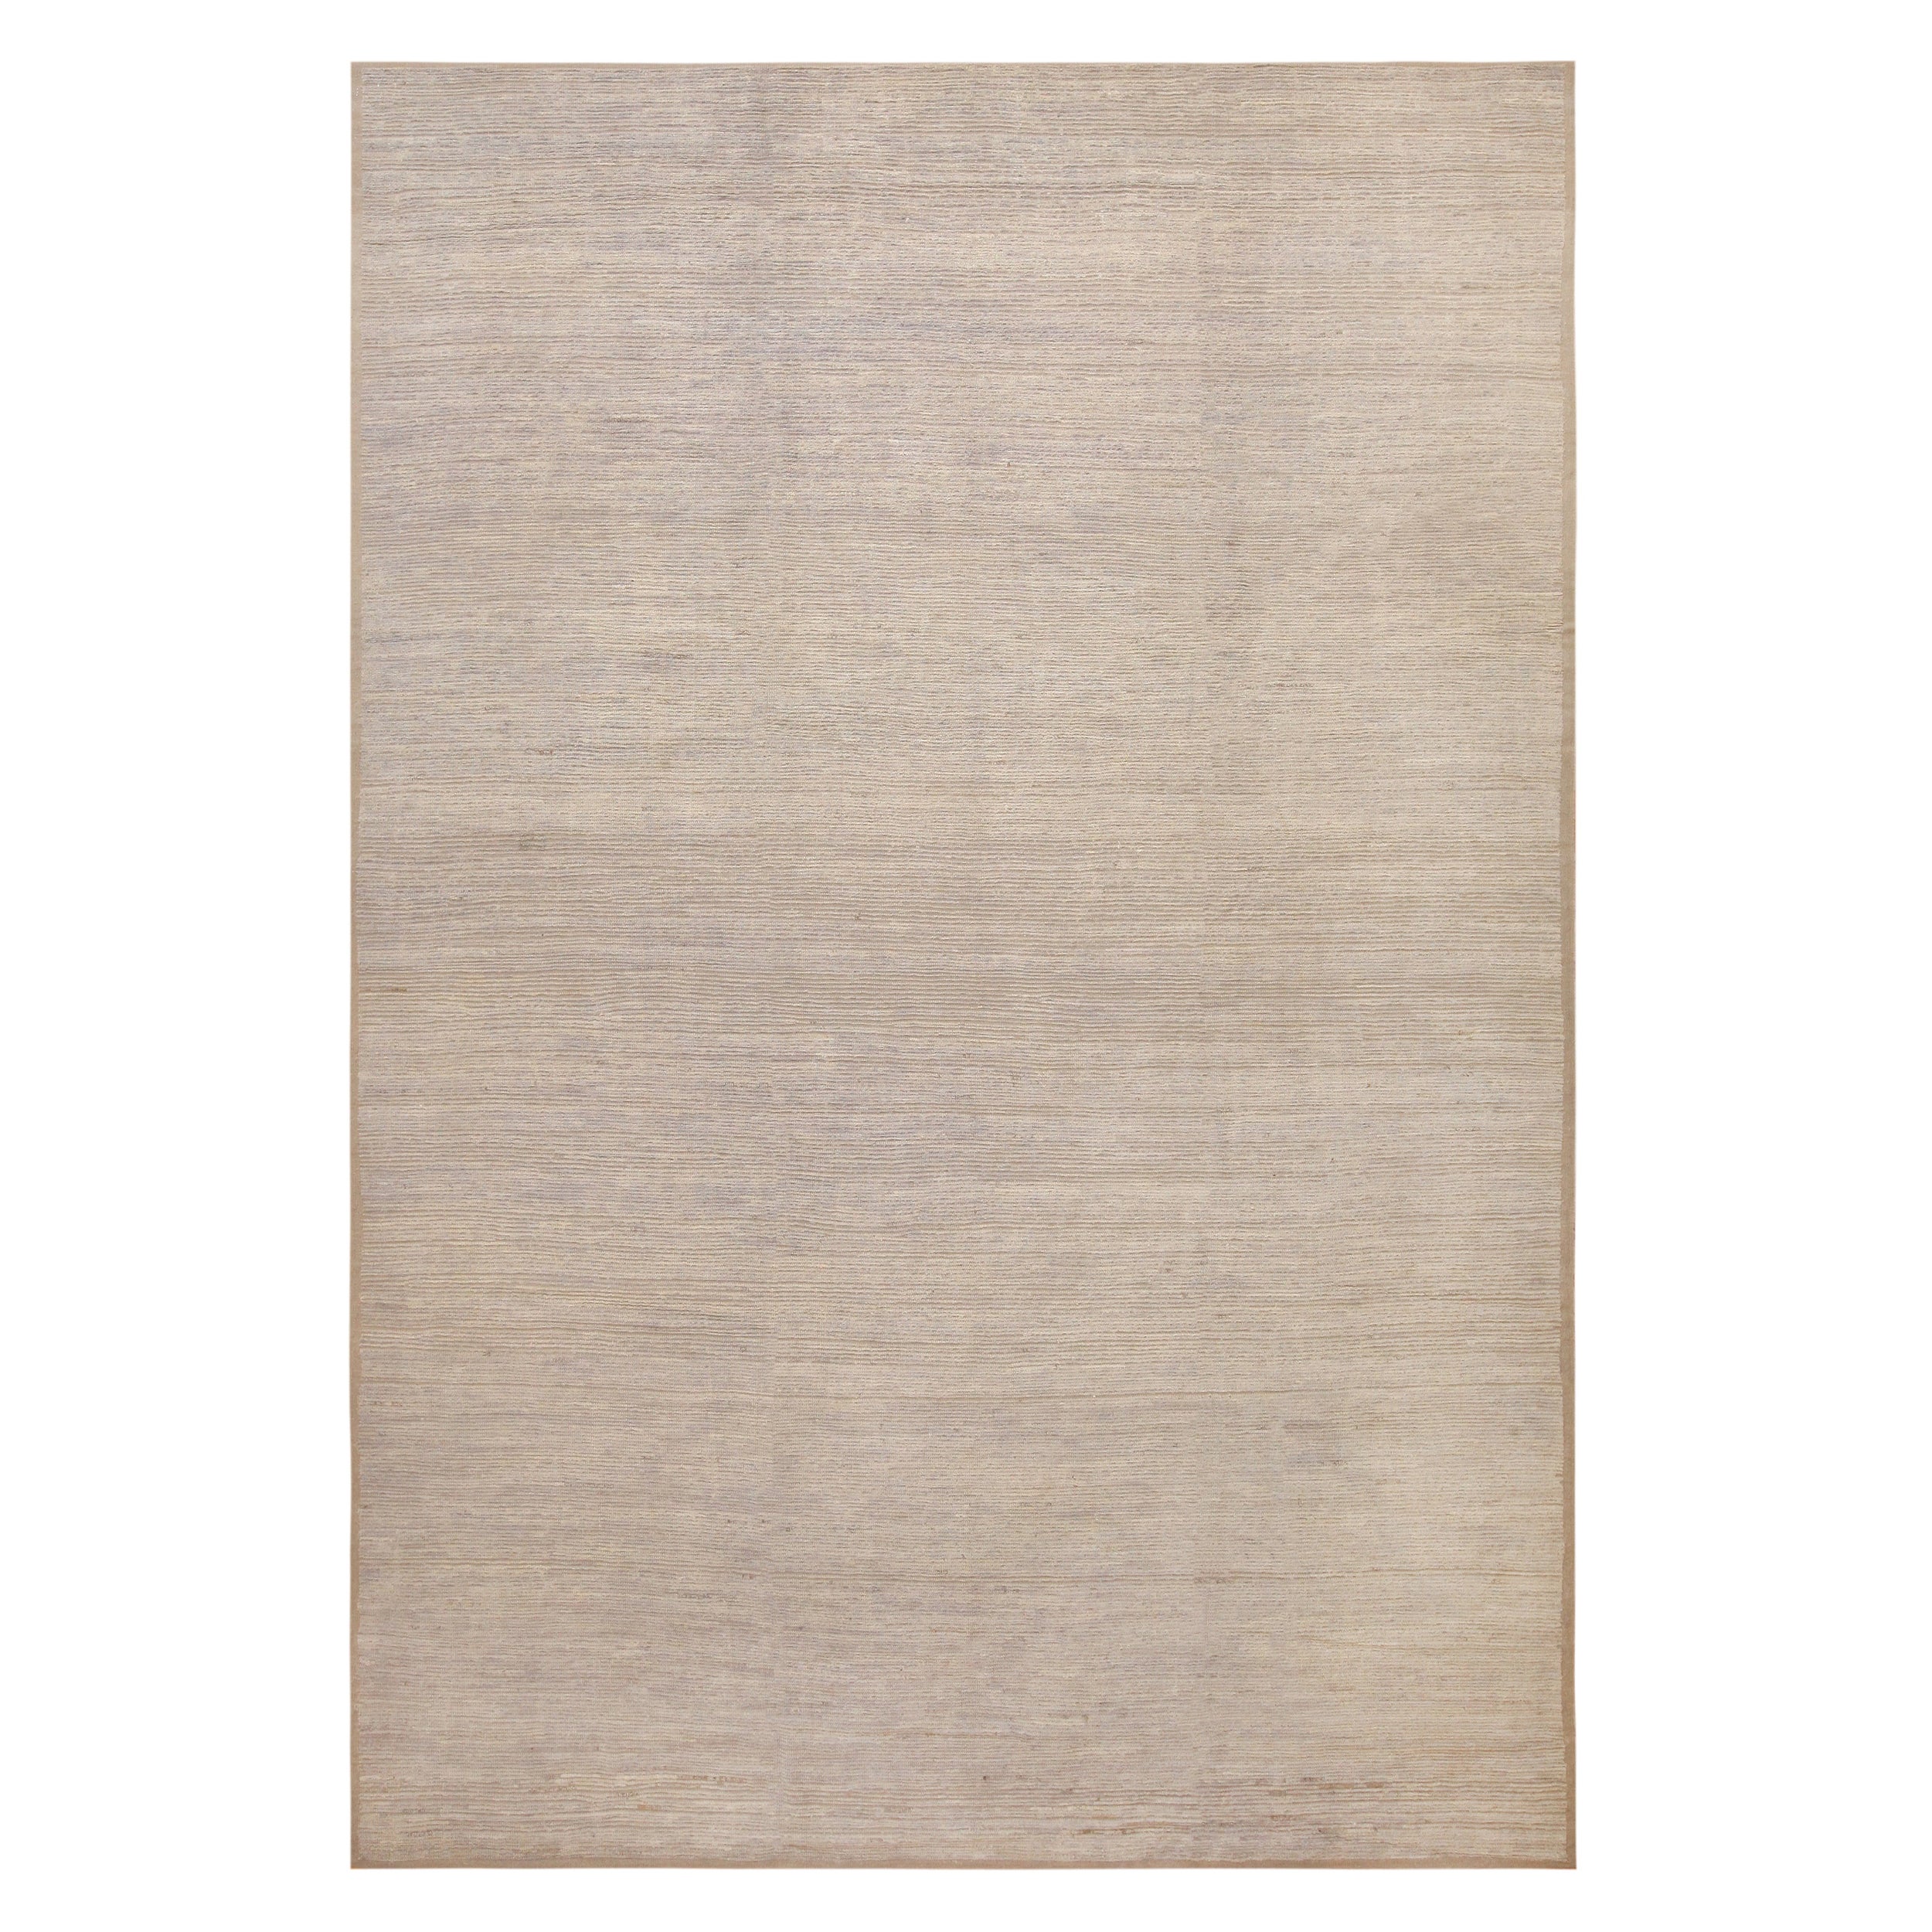 Nazmiyal Collection Gentle Tone Minimalist Modern Rug. 9 ft 6 in x 13 ft 10 in